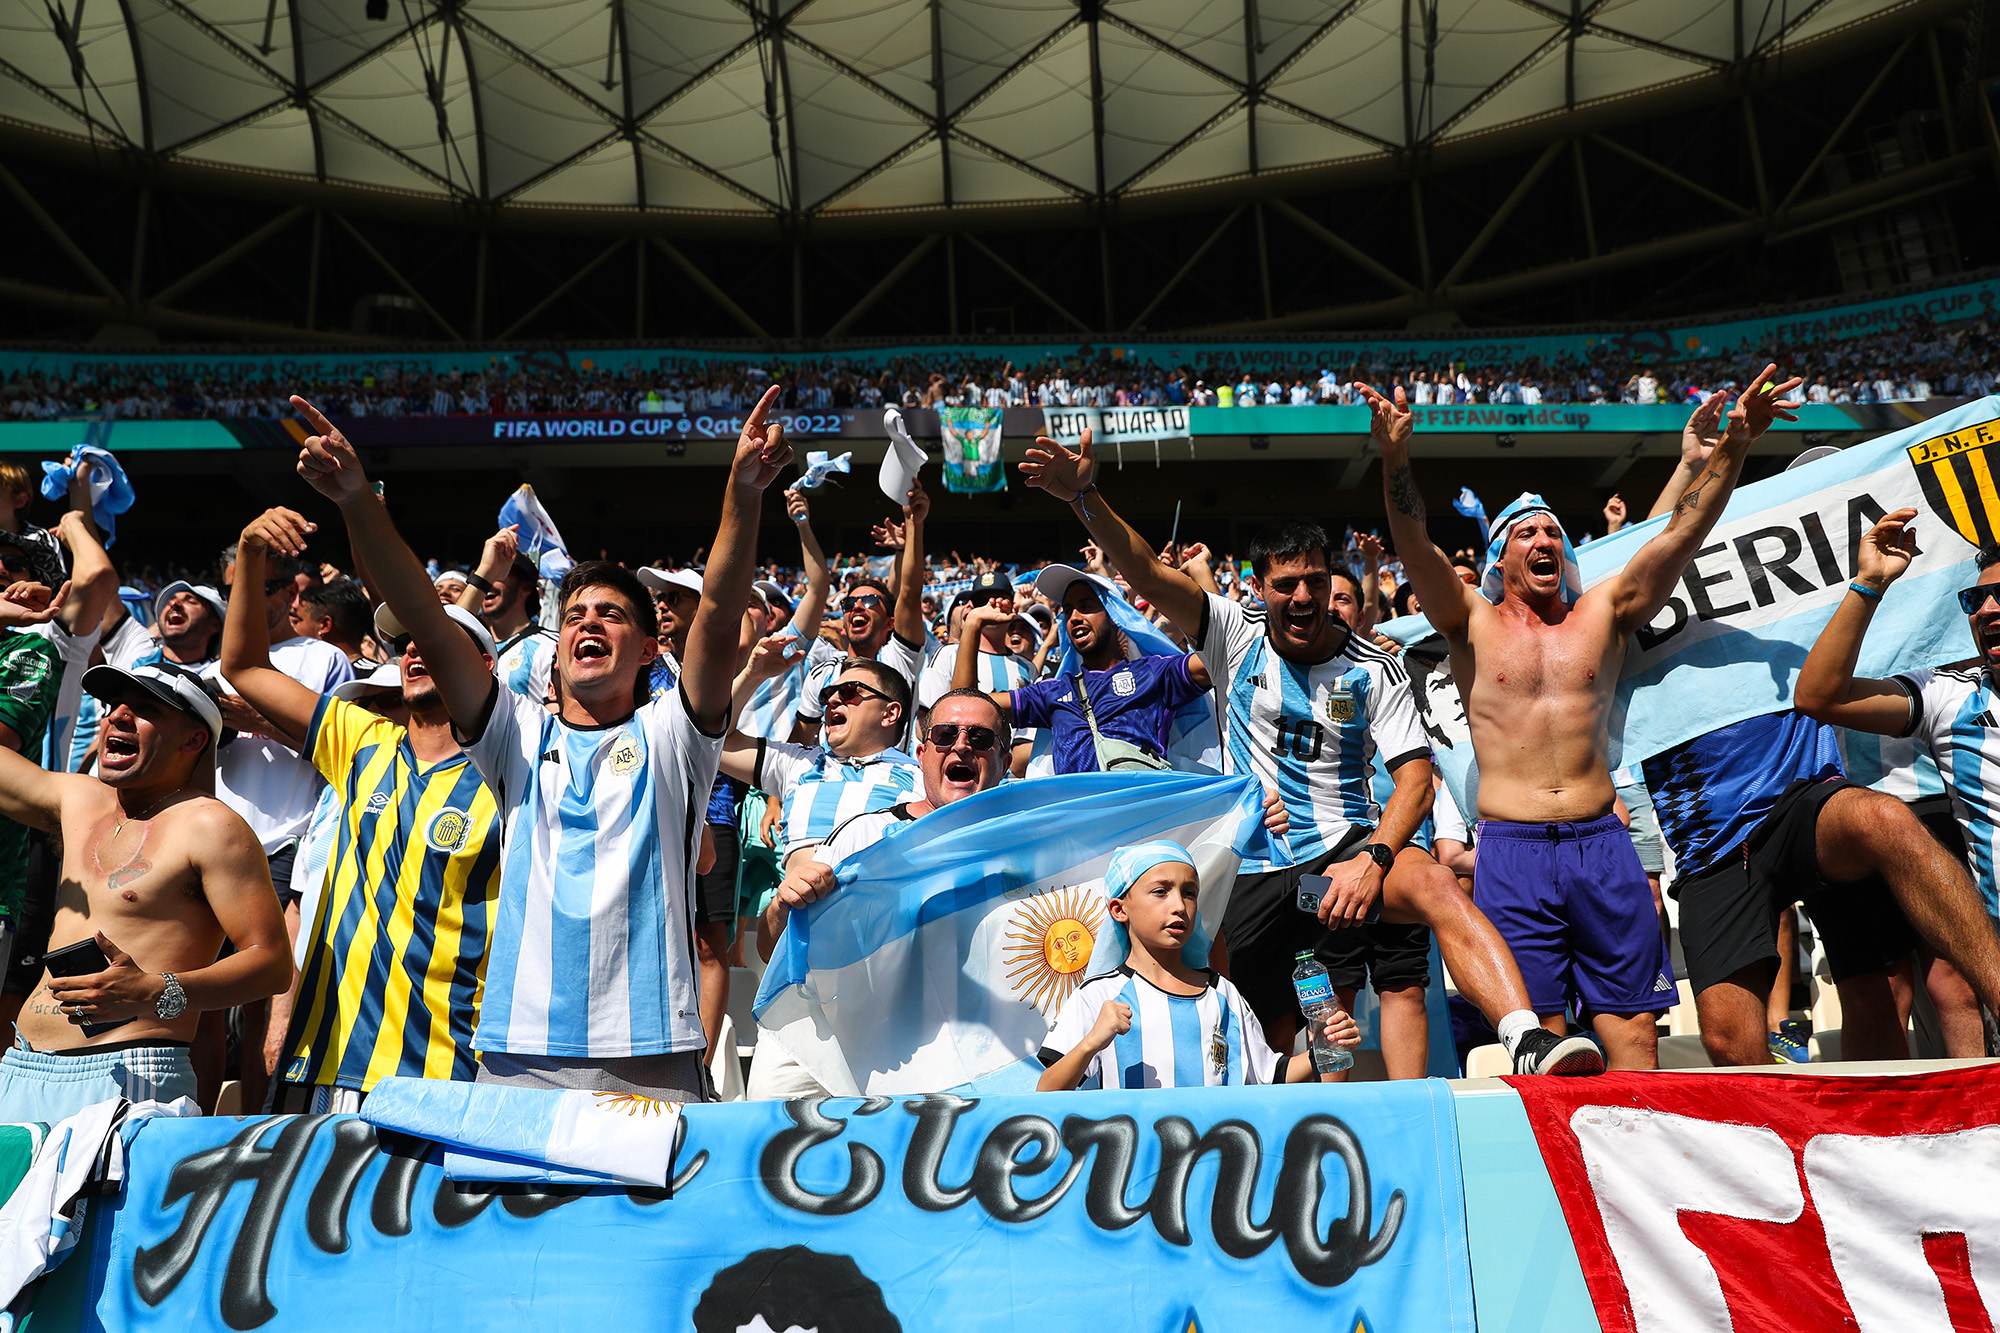 Argentina supporters show their support during the Group C match between Argentina and Saudi Arabia at the Lusail Stadium on November 22.